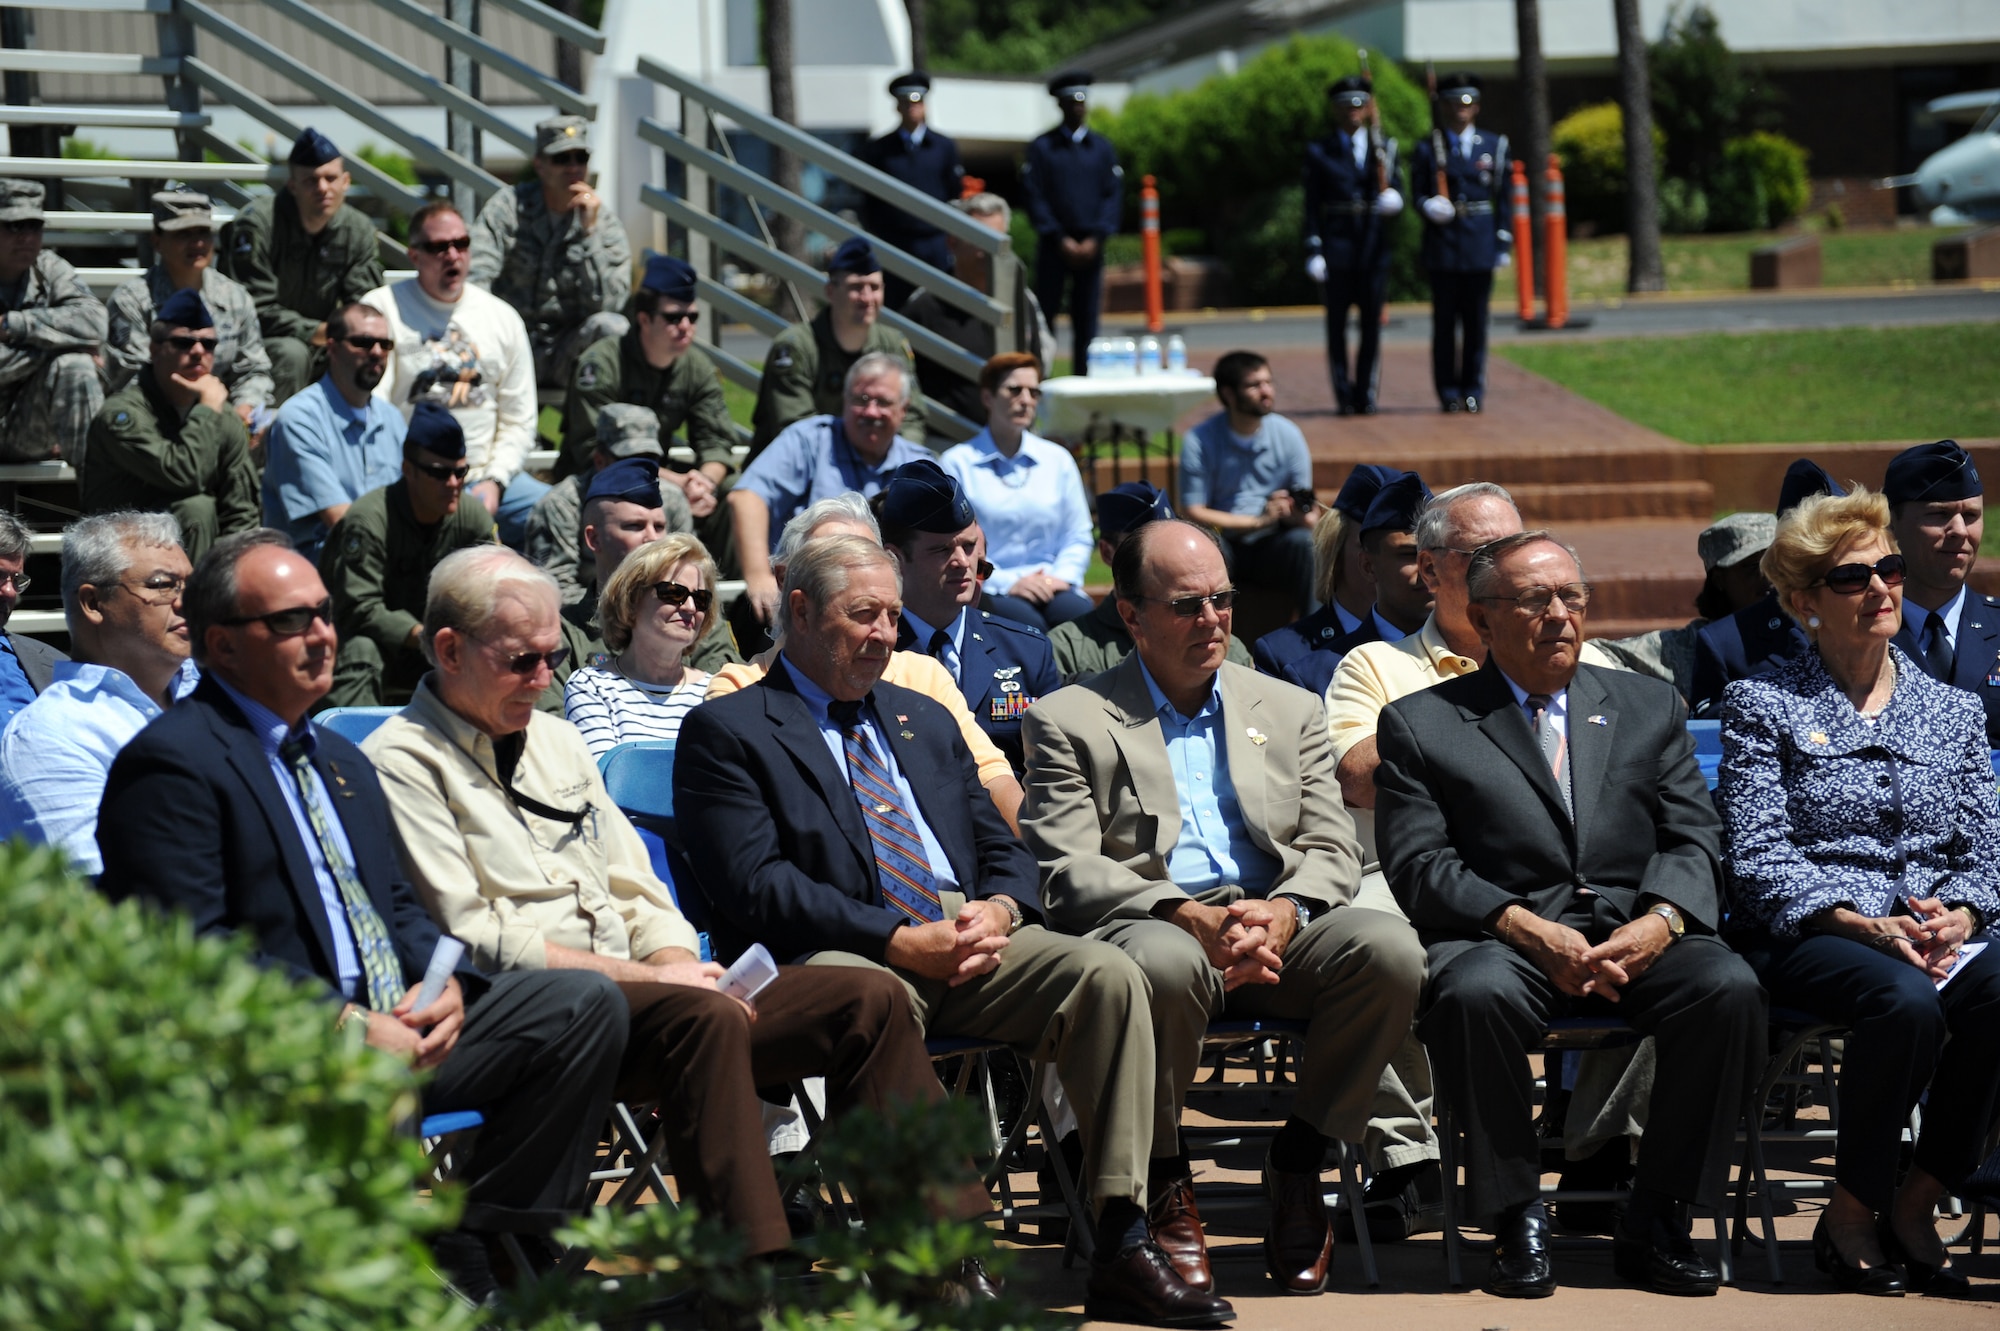 Retired particiapnts of Operation Eagle Claw listen as retired Colonel Roland Guidry talks about the operation during a memorial ceremony April 29. Operation Eagle Claw, conducted April 24, 1980, was a complex mission to rescue U.S. citizens taken hostage in the U.S. embassy in Iran.  Tragically, the attempt ended in the death of eight service members, including five from Hurlburt Field’s 1st Special Operations Wing. (DoD photo by U.S. Air Force Senior Airman Matthew Loken)